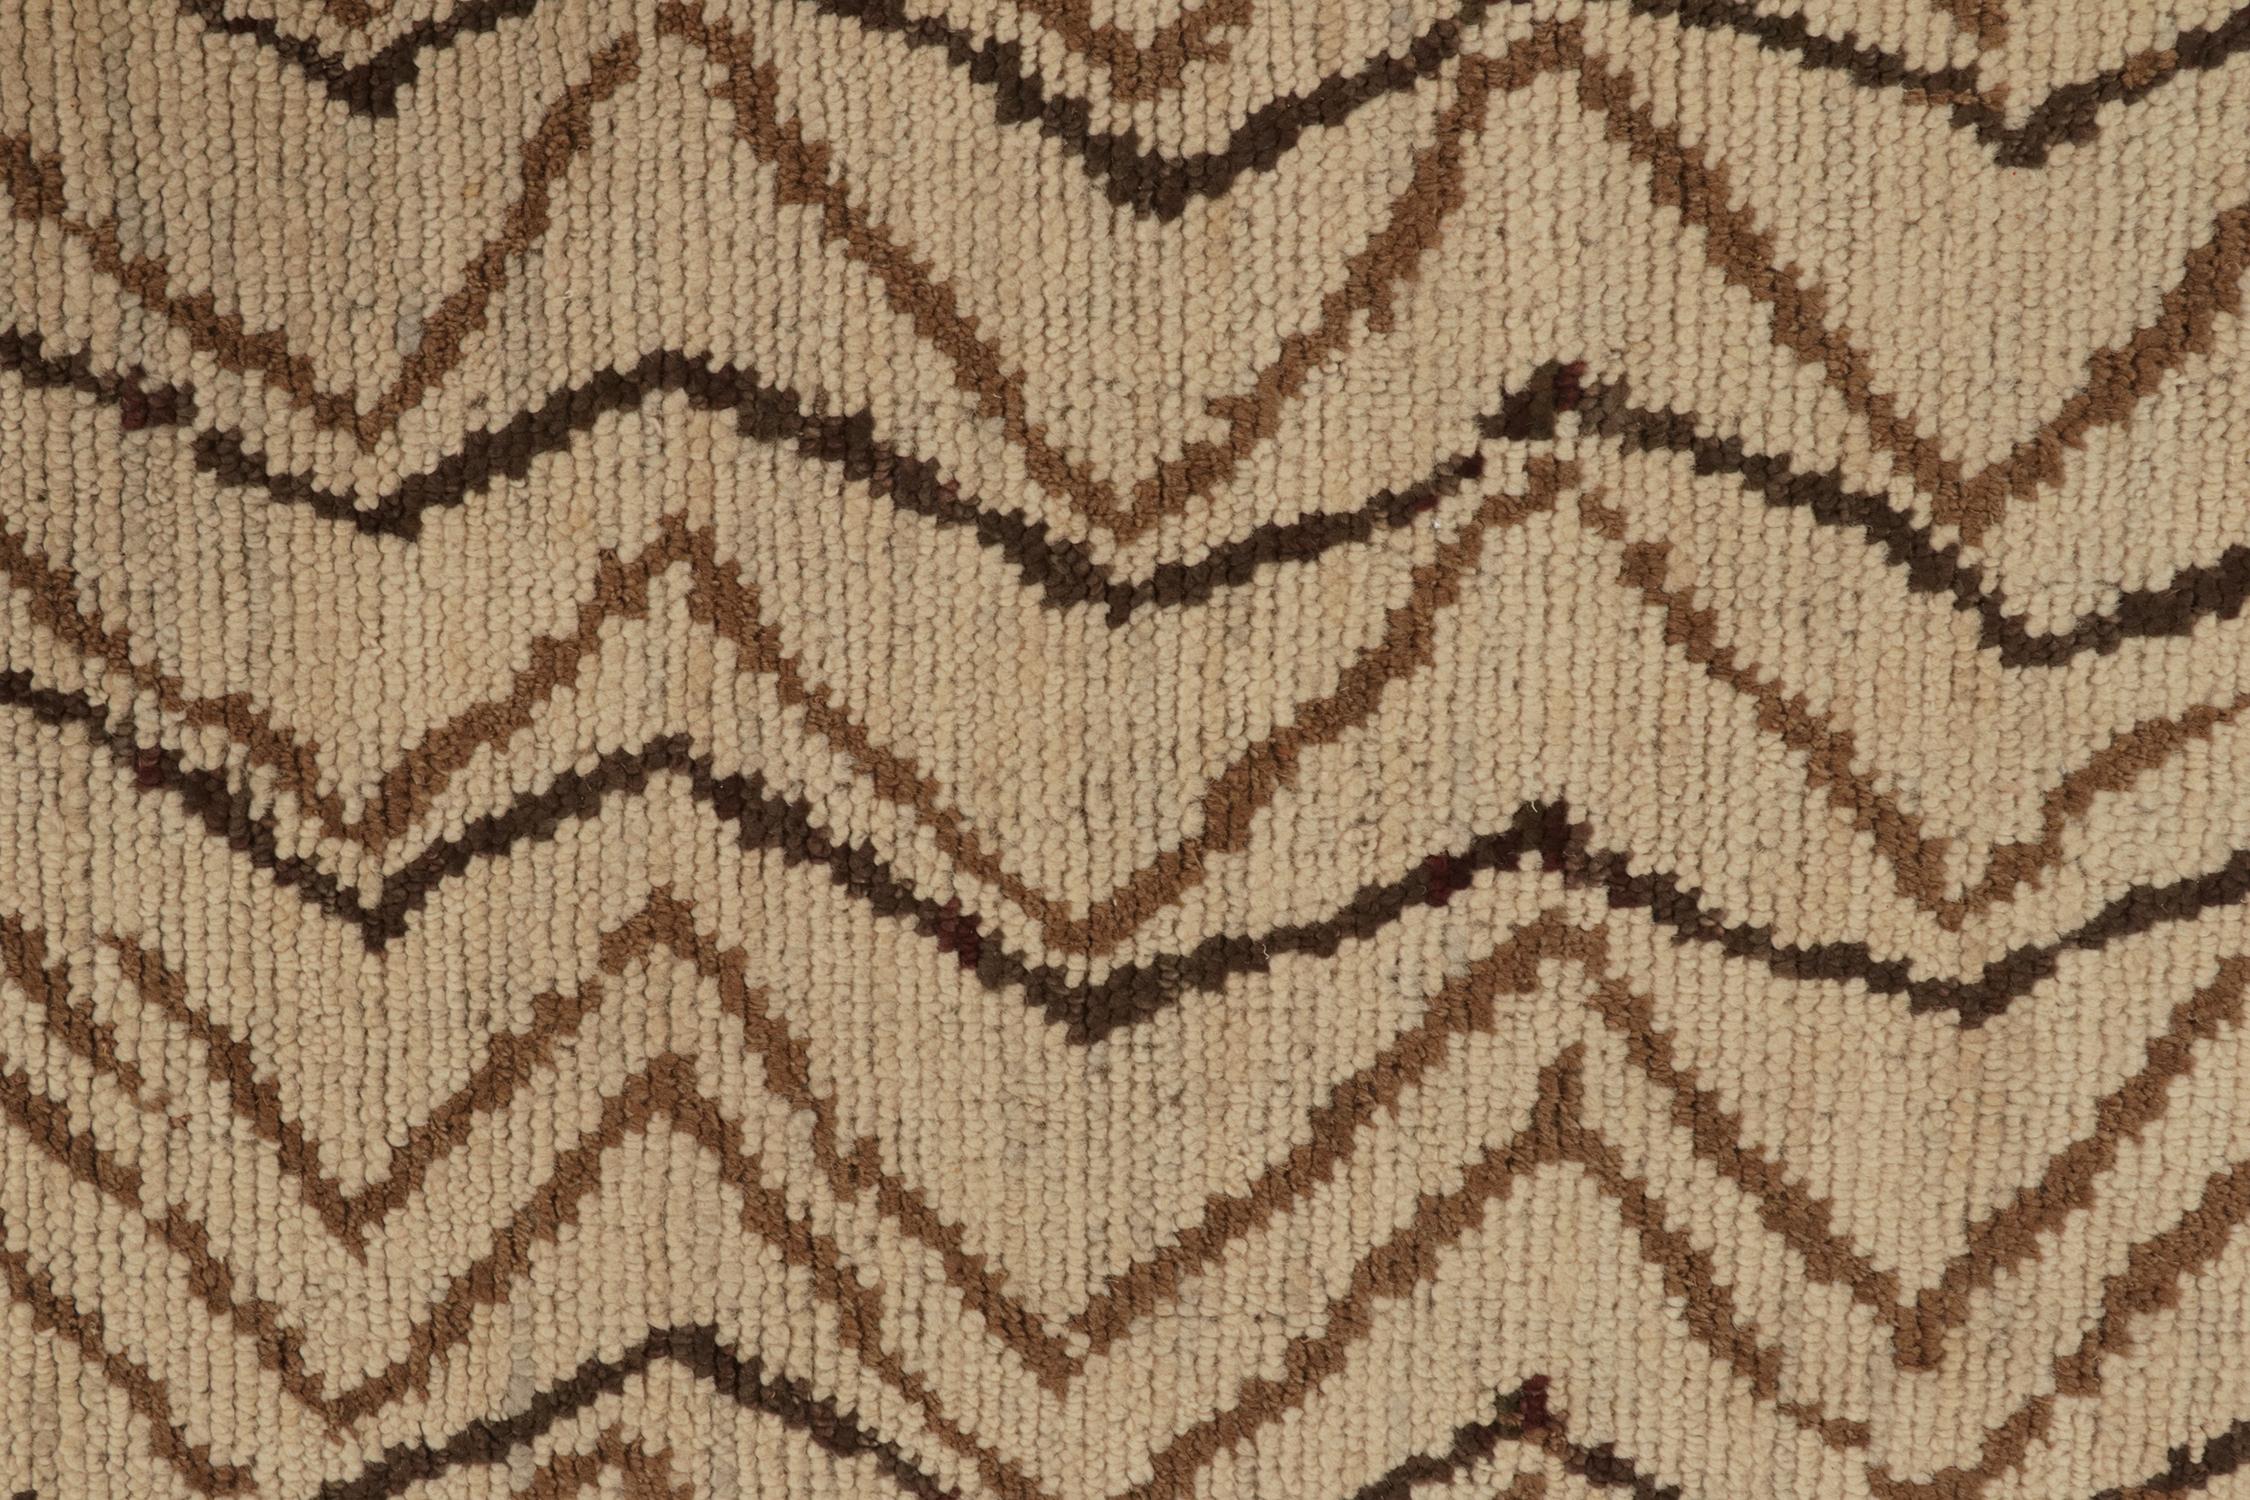 Rug & Kilim's Moroccan Style Rug in Beige-Brown Chevrons with Gold Accents (tapis de style marocain à chevrons beige et marron avec des accents dorés) Neuf - En vente à Long Island City, NY